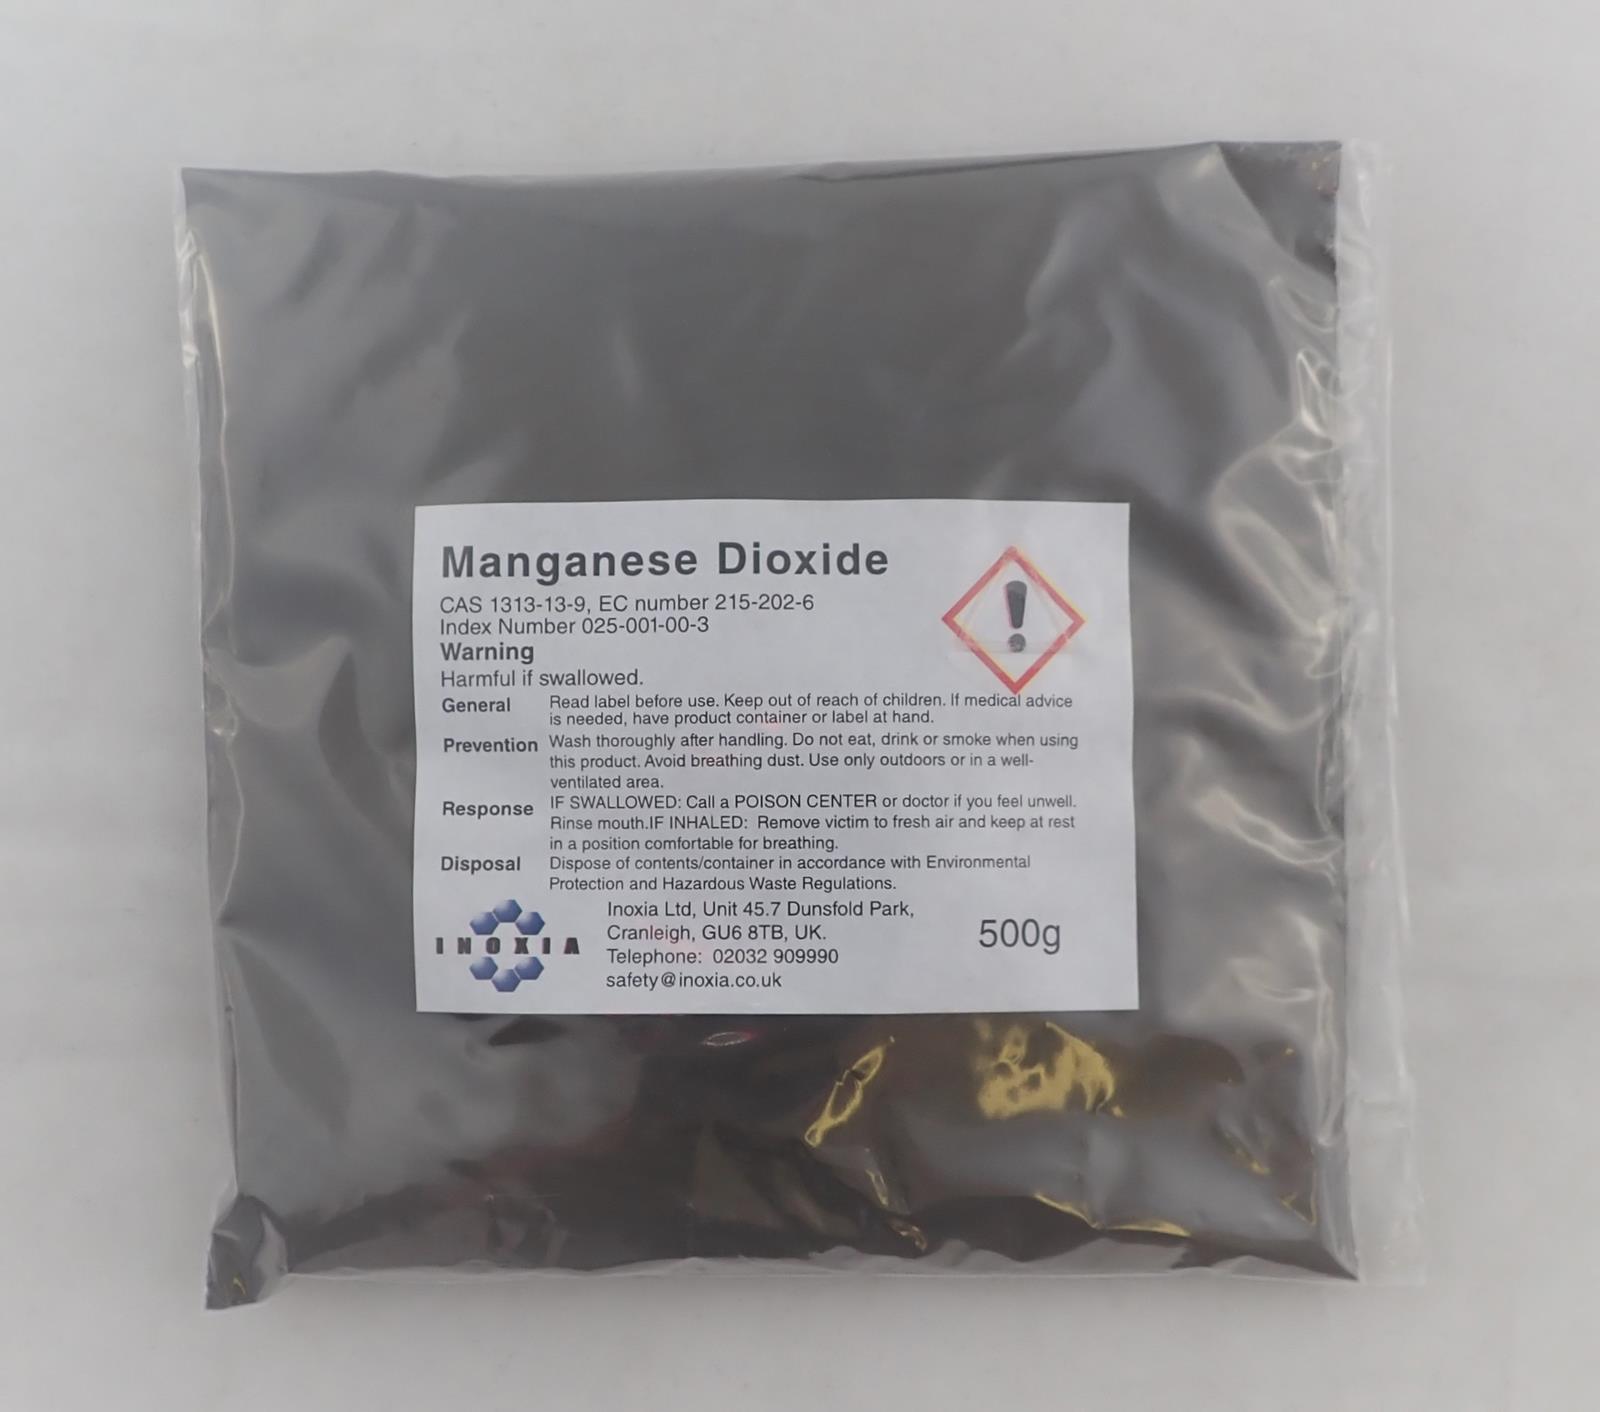 Manganese Dioxide Balanced Formula : Manganese Oxide Mineral Specimen For Sale / The chemical formula of hydrogen peroxide is h2o2, the chemical formula for oxygen is o2, and the chemical formula for water is h2o.